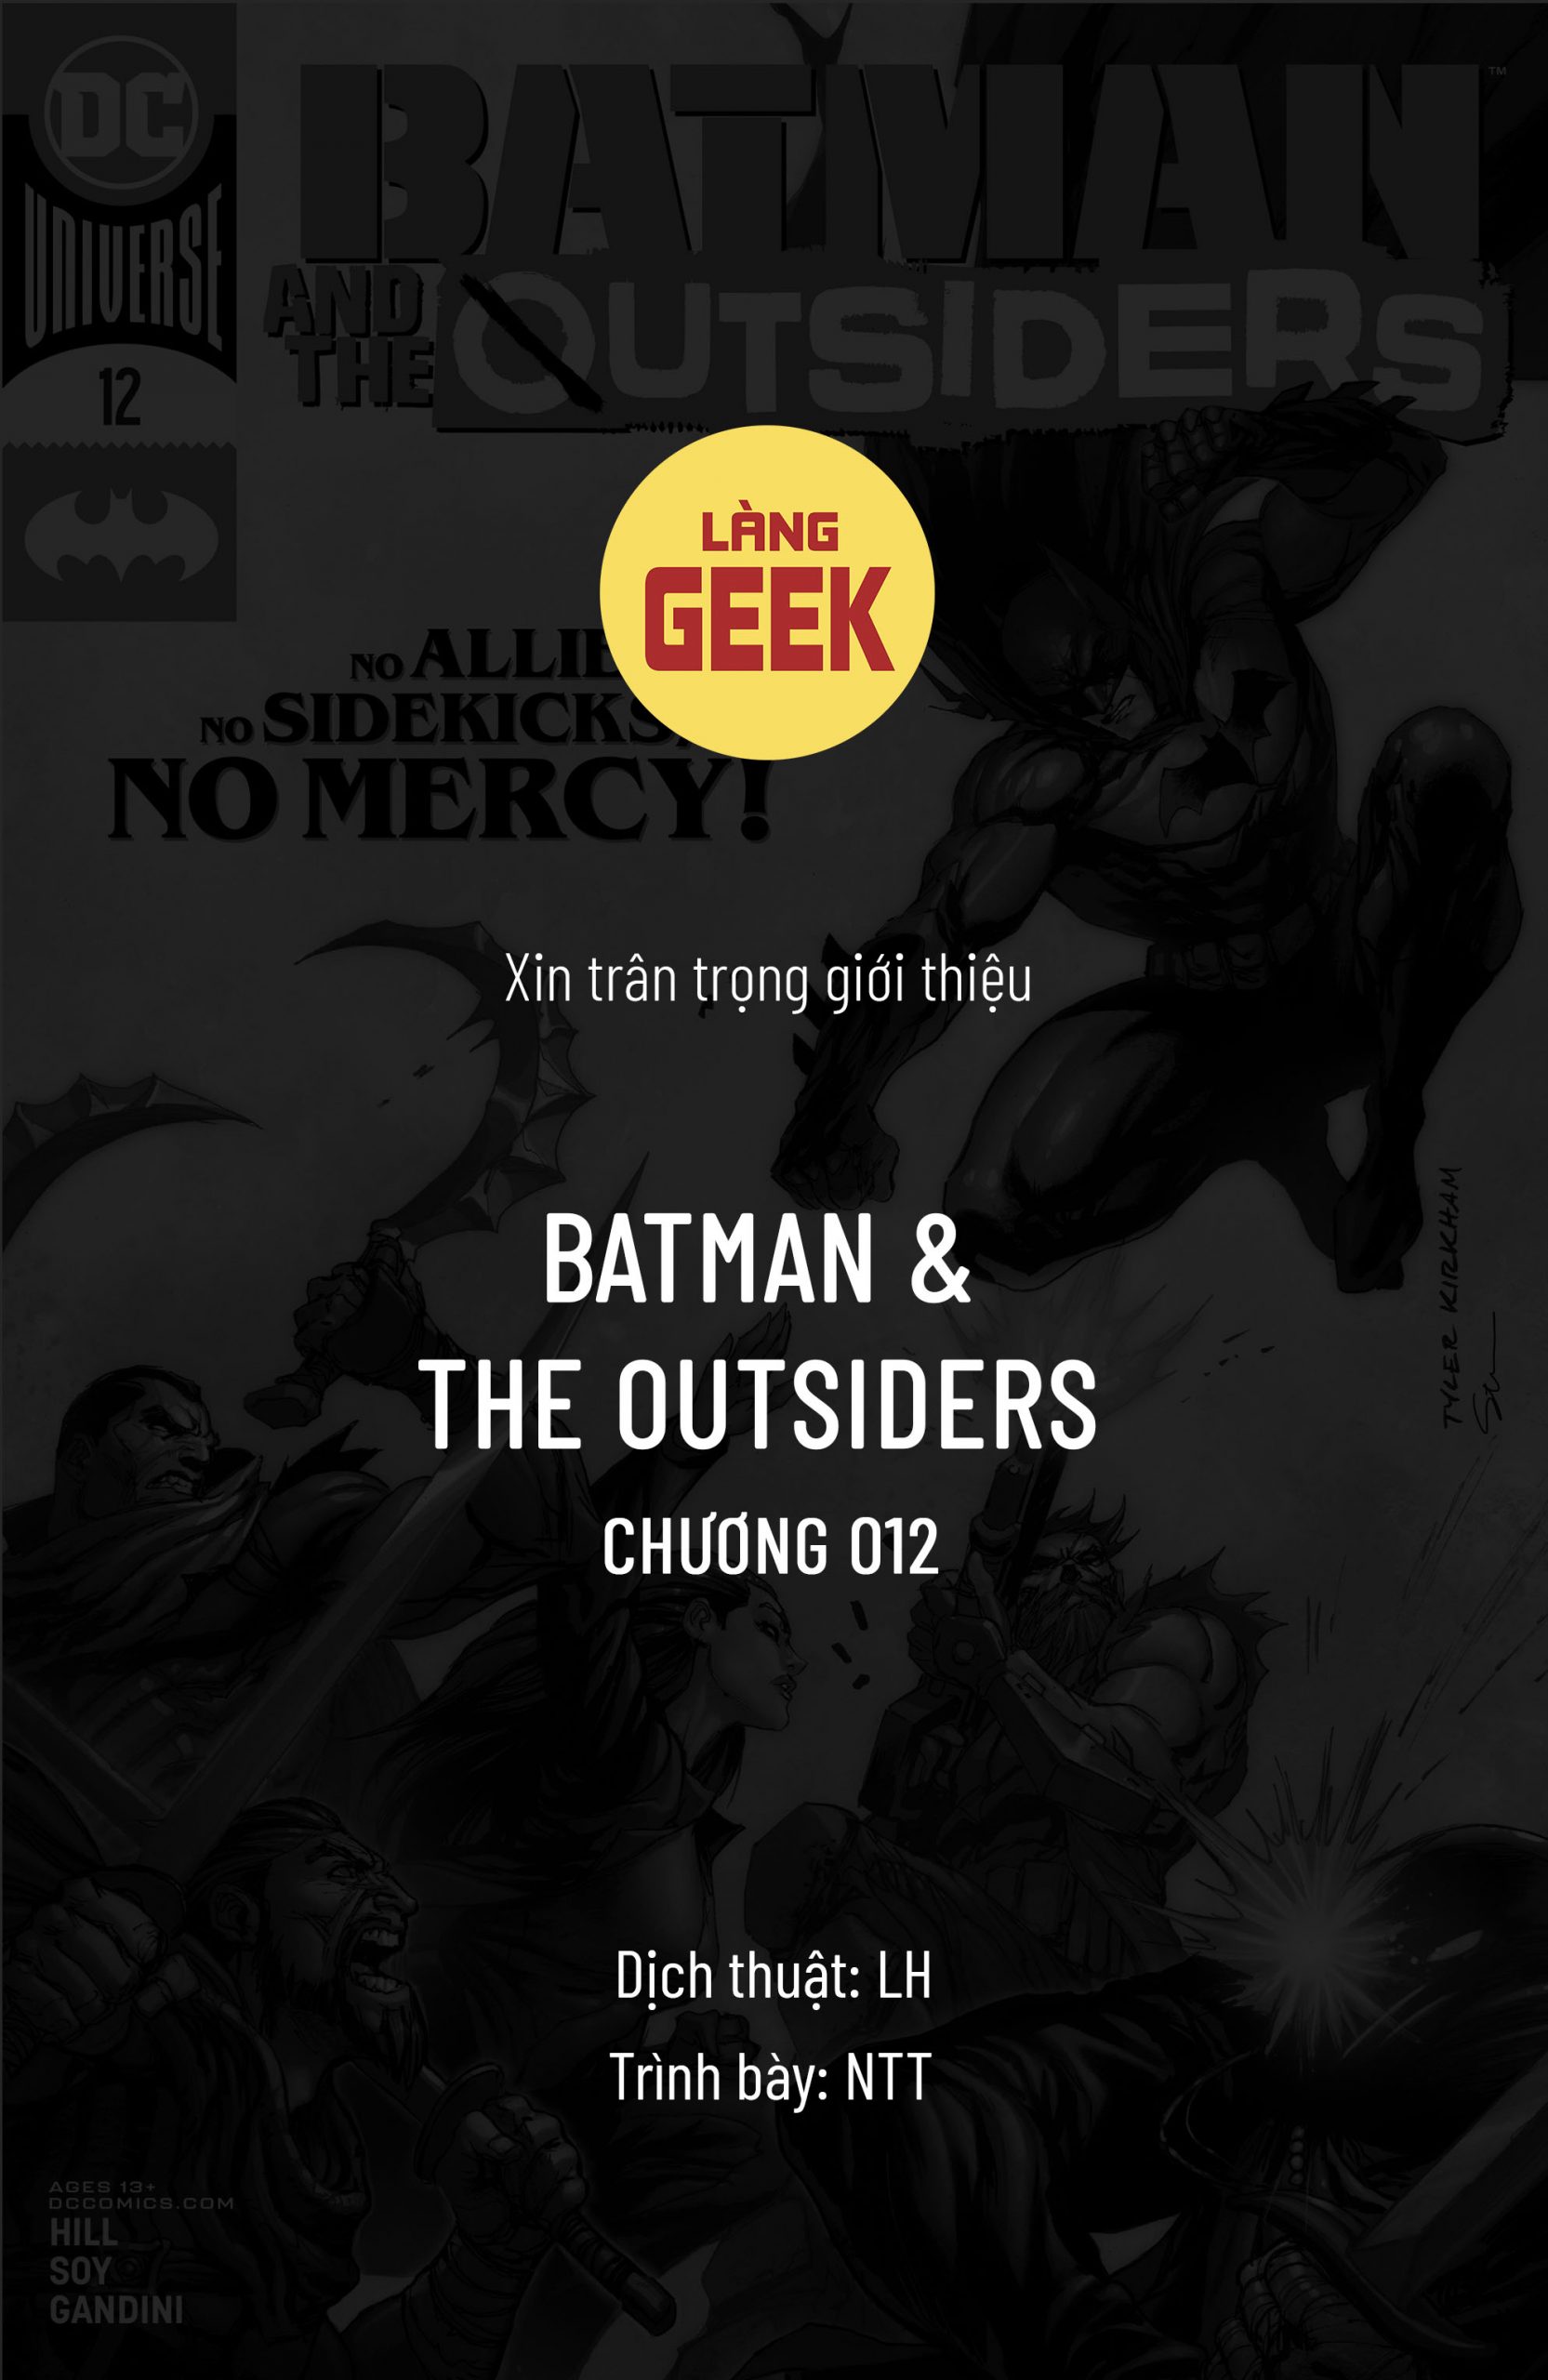 https://langgeek.net/wp-content/uploads/2021/12/Batman-and-the-Outsiders-012-001-scaled.jpg